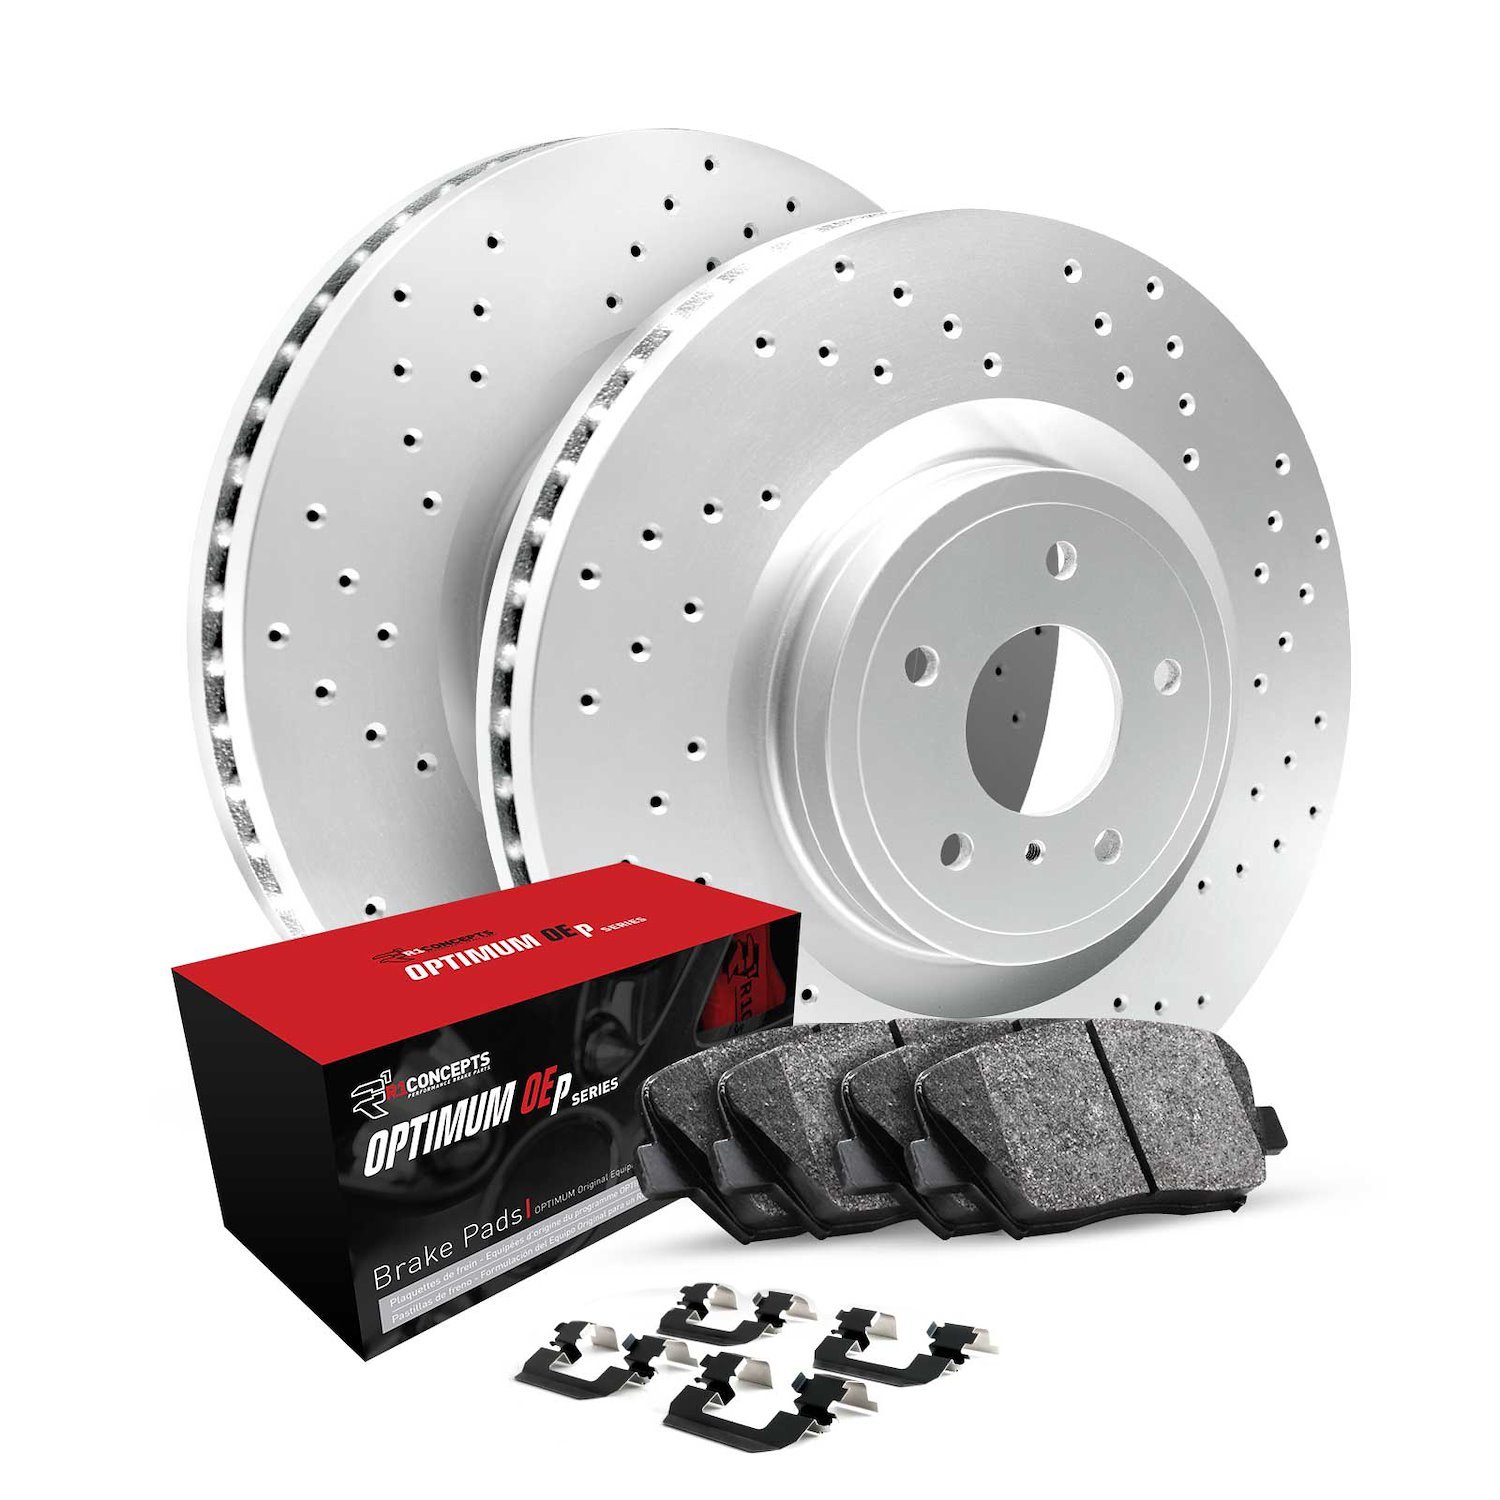 GEO-Carbon Drilled Rotors w/Optimum OE Pads/Hardware, Fits Select Fits Multiple Makes/Models, Position: Rear